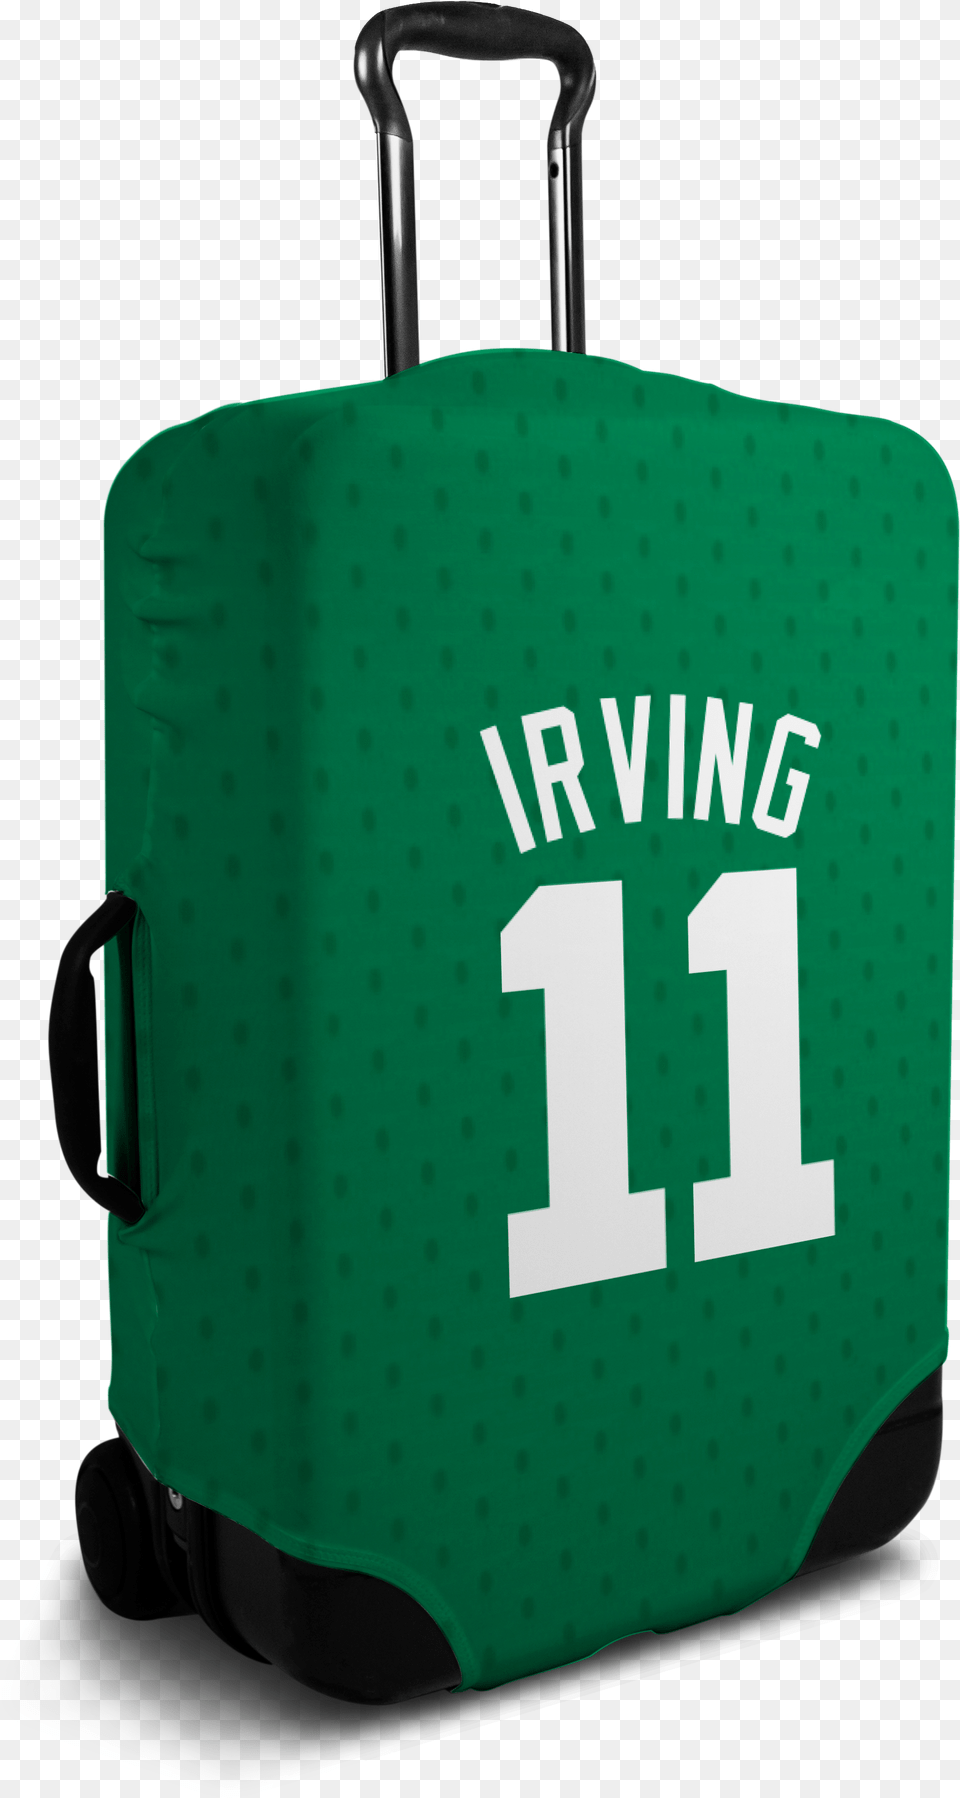 Kyrie Irving Jersey Mail Bag, Baggage Png